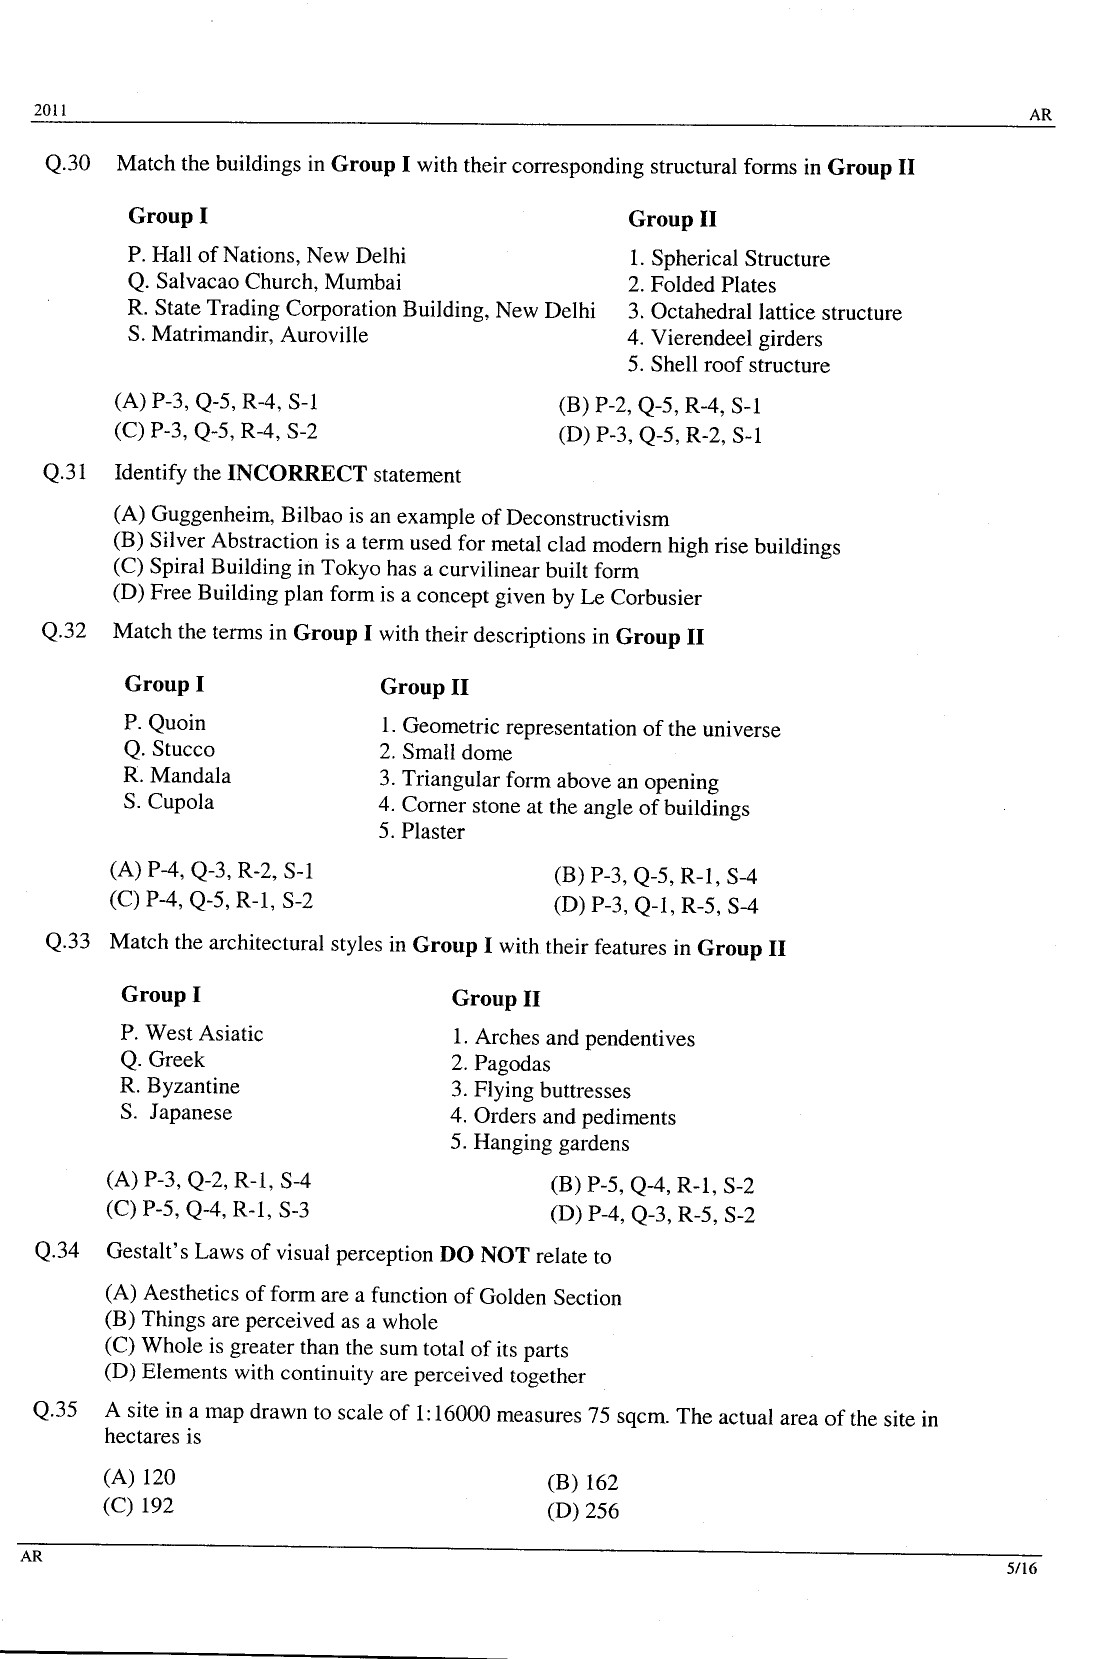 GATE Exam Question Paper 2011 Architecture and Planning 5